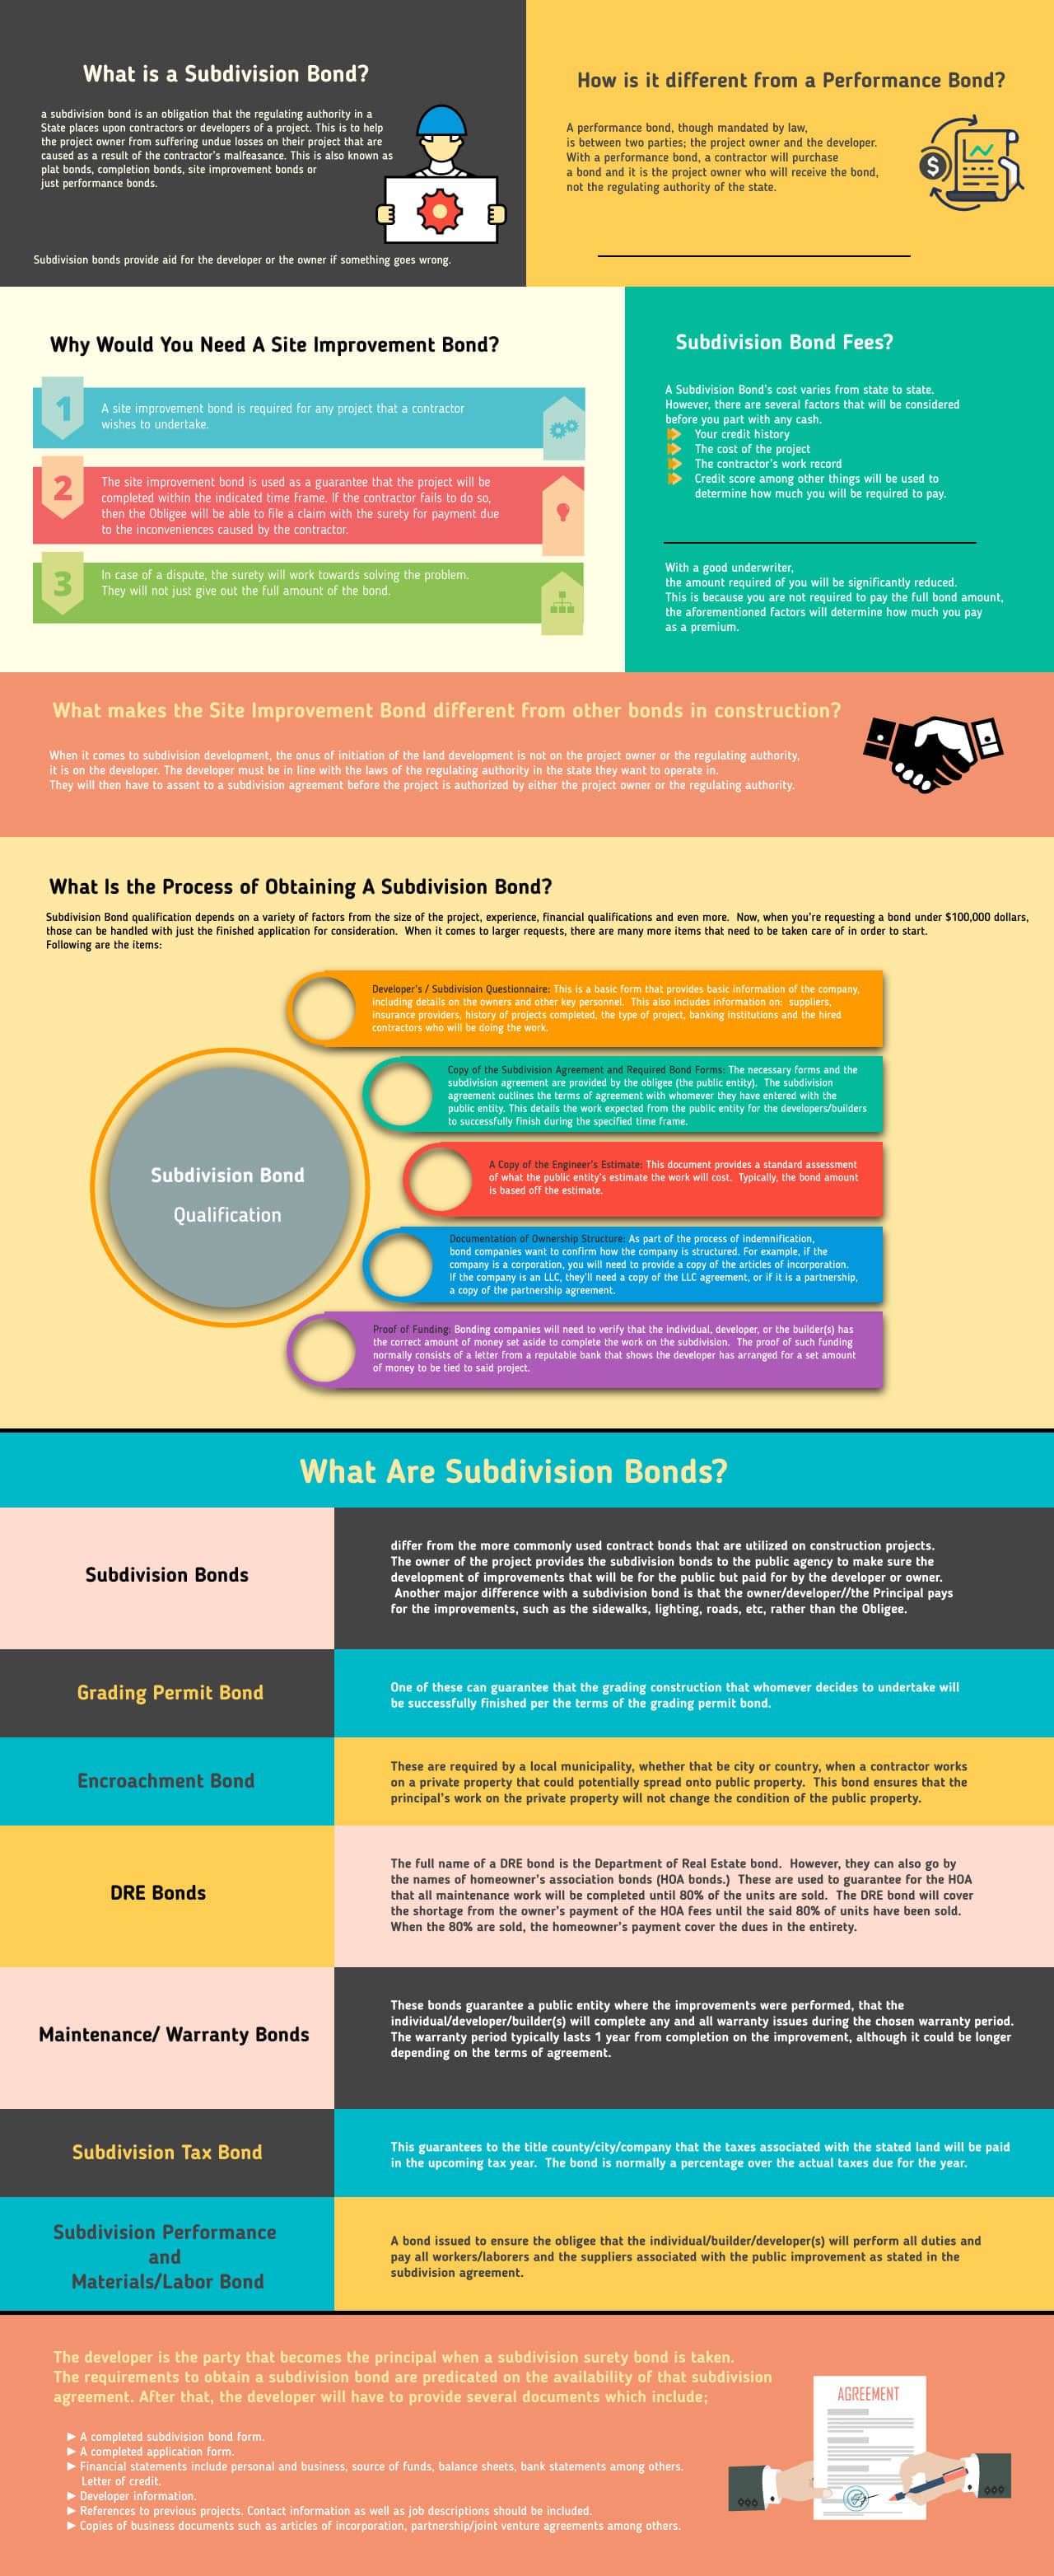 Subdivision Bonds - infographic on what is a subdivision bond and how it is different from a performance bond and why one needs a site improvement bond and the fees for a subdivision bond as well as the process for getting a site improvement bond - black and white text on multi colored background